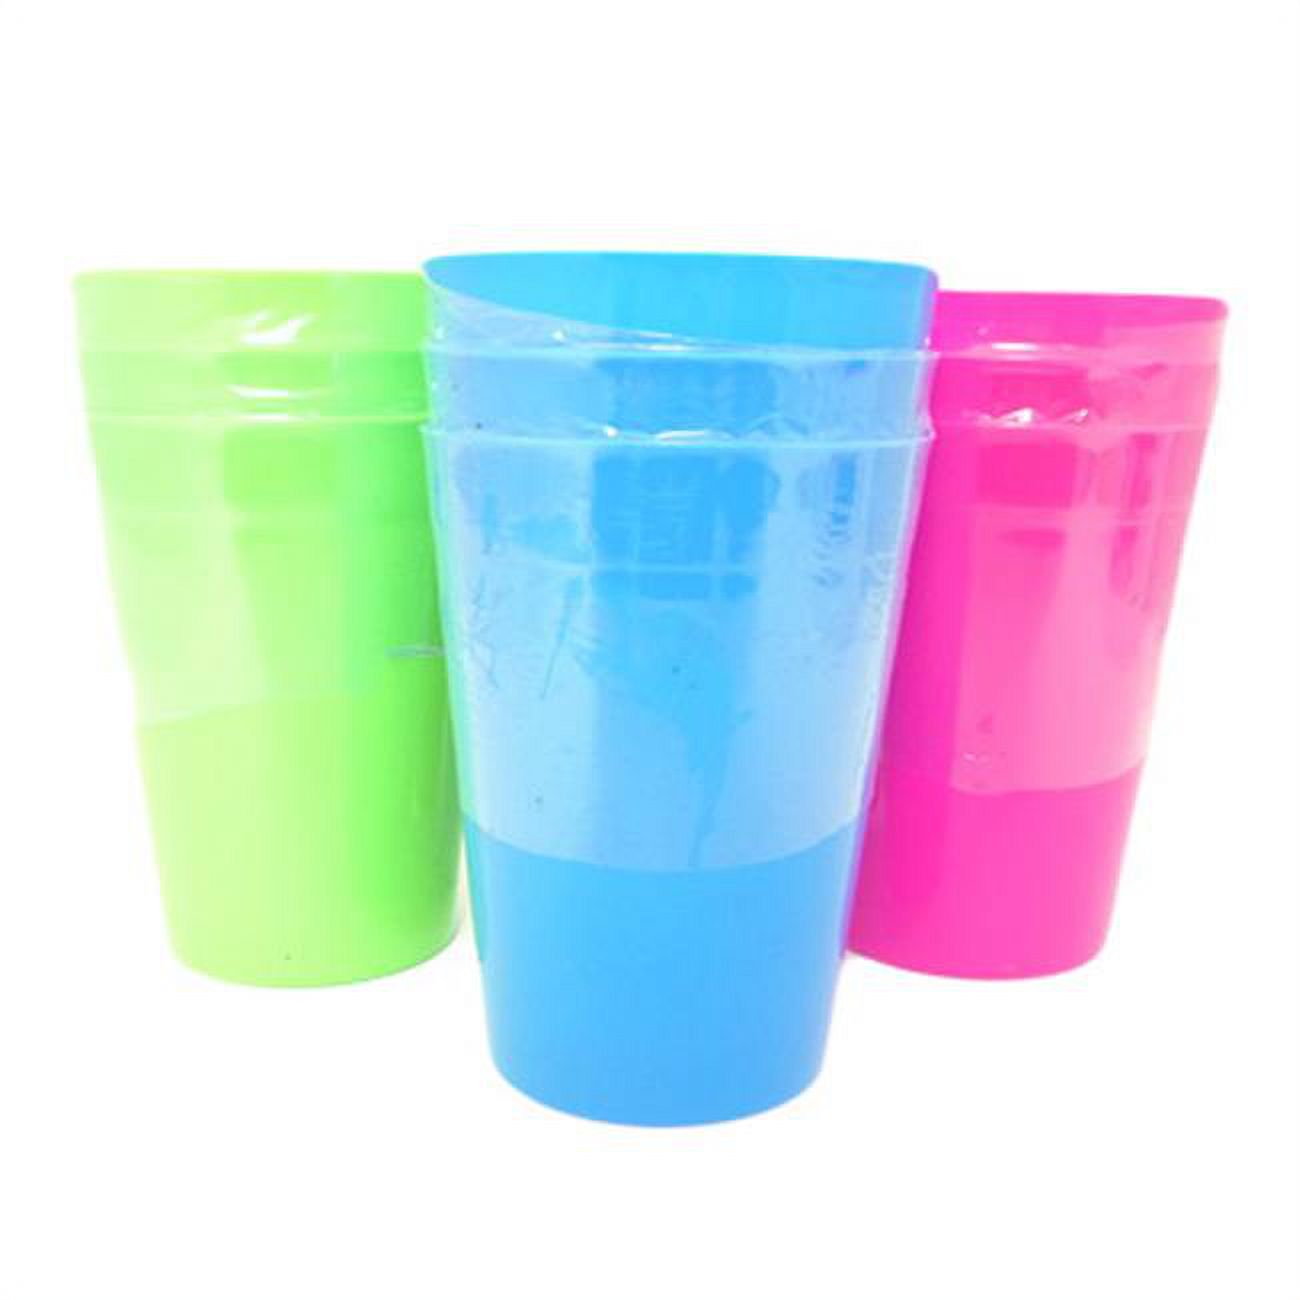 Picture of FamilyMaid 60164 3.5 dia. x 5.9 in. Assorted Color Plastic Tumbler, 3 Piece - Pack of 96